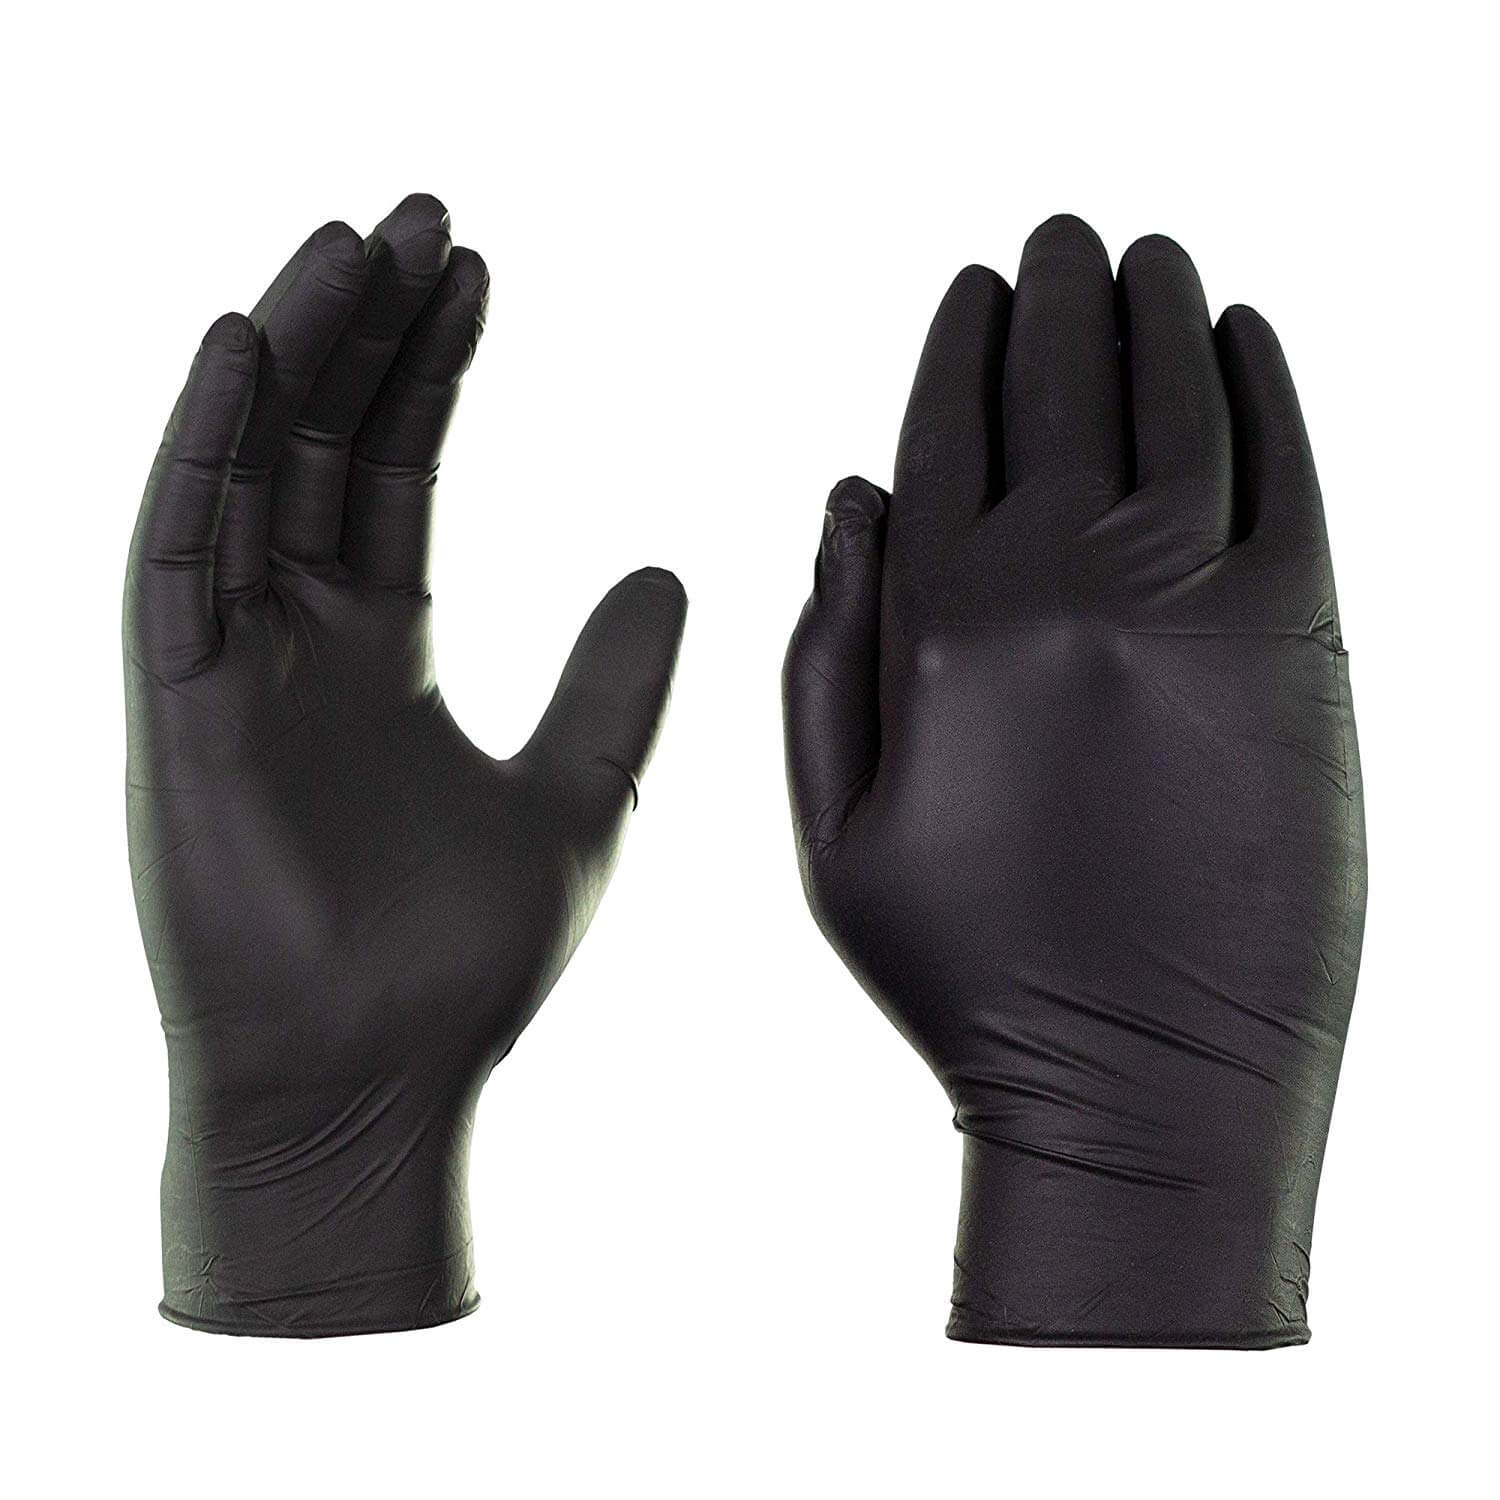 Nitrile Gloves Buying Guide